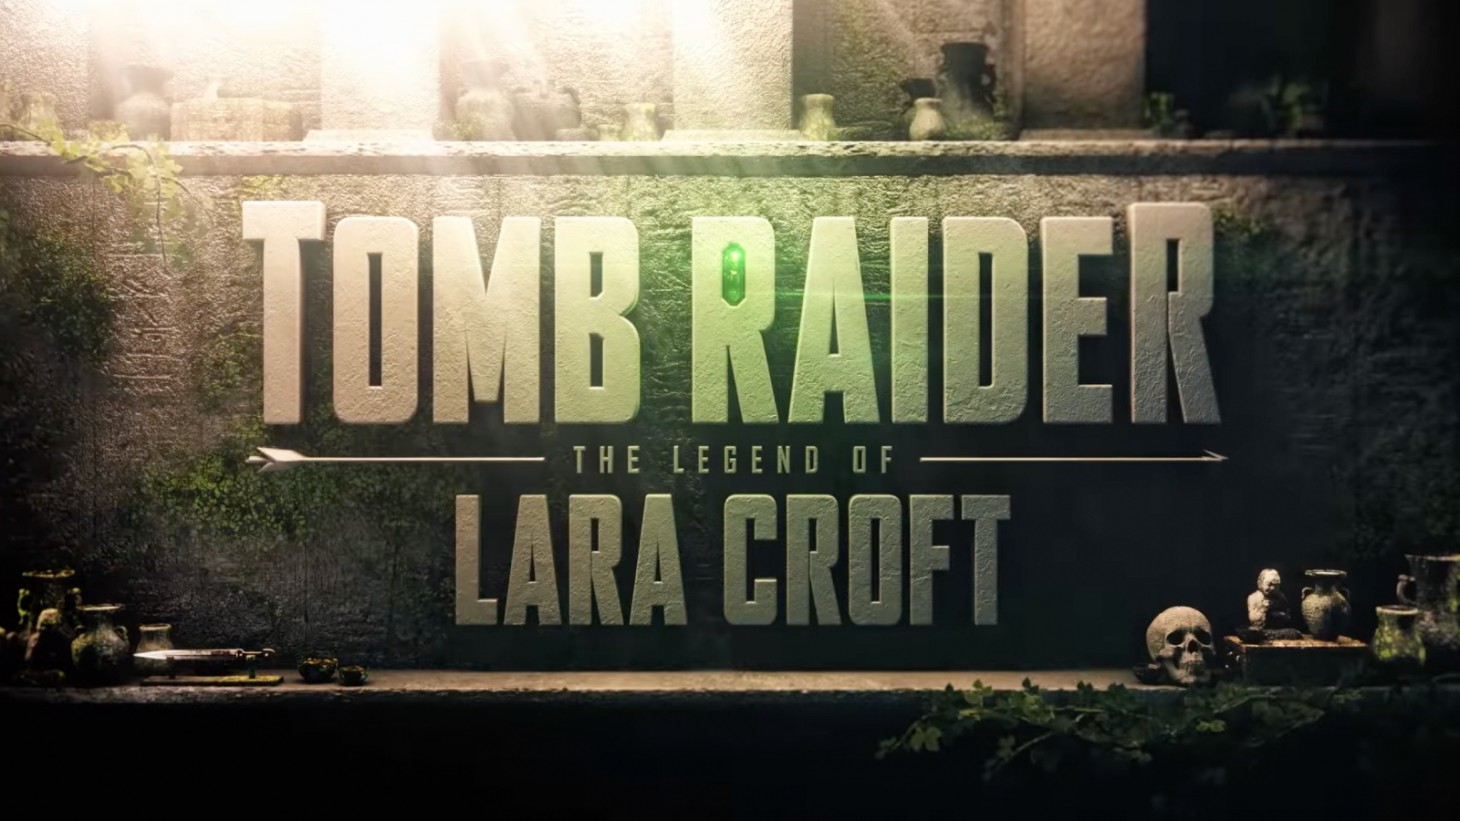 Tomb Raider Animated Series Announced By Netflix, Set After The